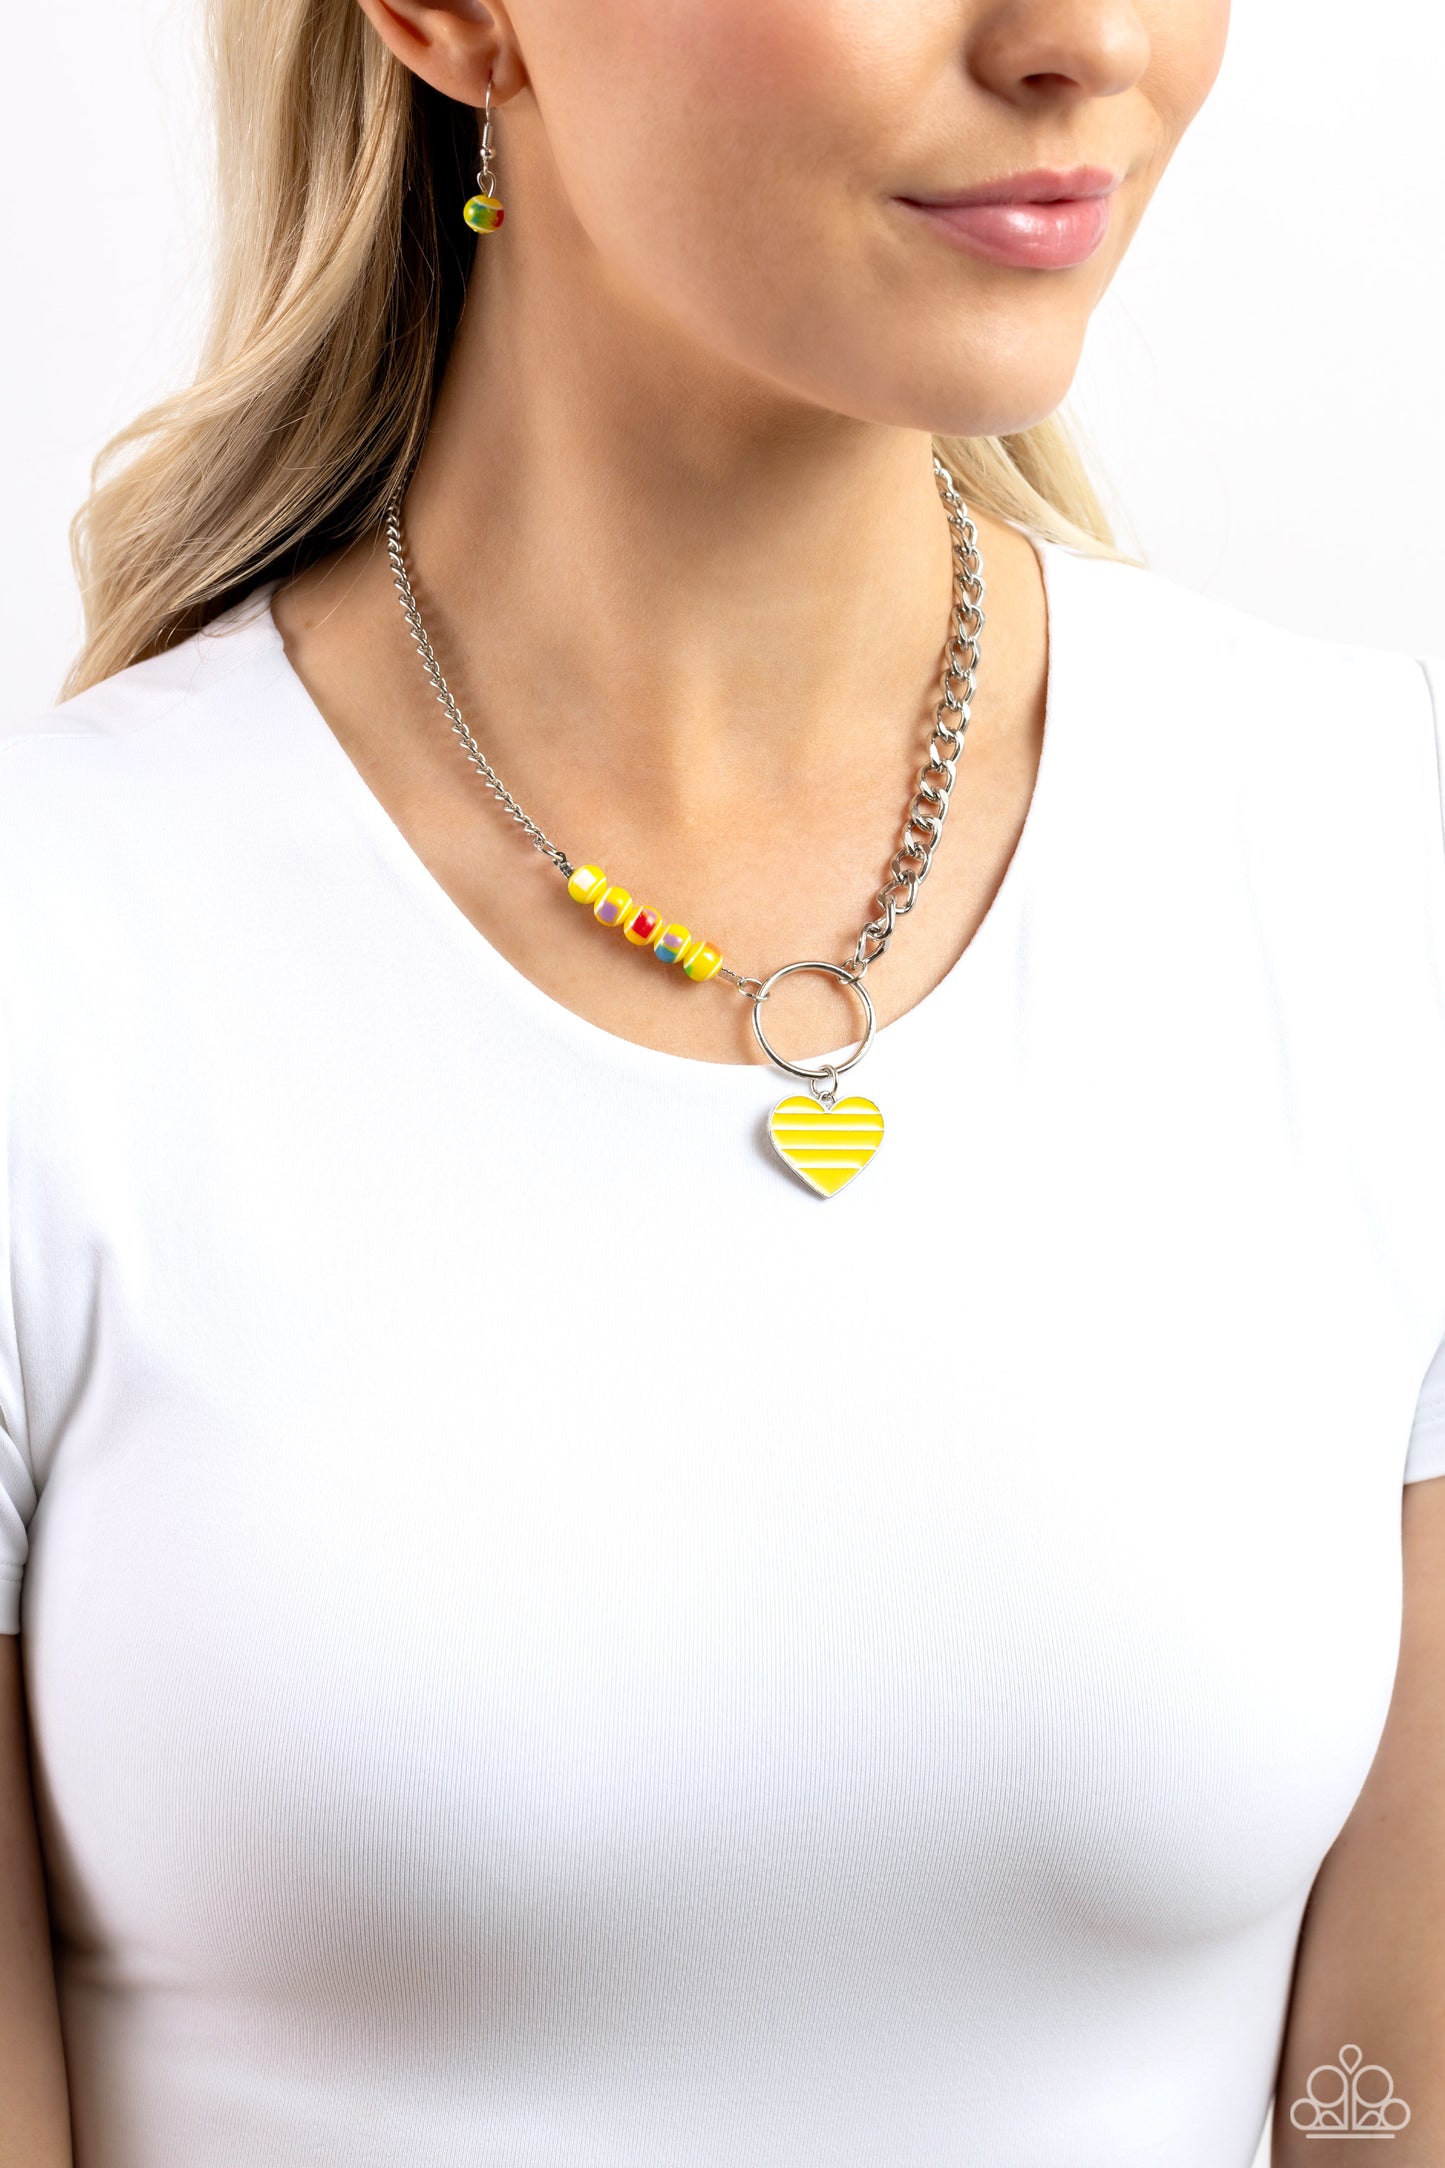 Mismatched Mayhem Yellow Heart Necklace - Paparazzi Accessories  A strand of flat silver curb chain collides with a classic chain and a vivacious collection of yellow beads, featuring various multicolored splatters across its surface, to create an abstract blend of color and class. The mismatched chains connect to a large silver hoop with a yellow-striped silver heart dangling at the bottom of the display, infusing the design with additional charm. Features an adjustable clasp closure.